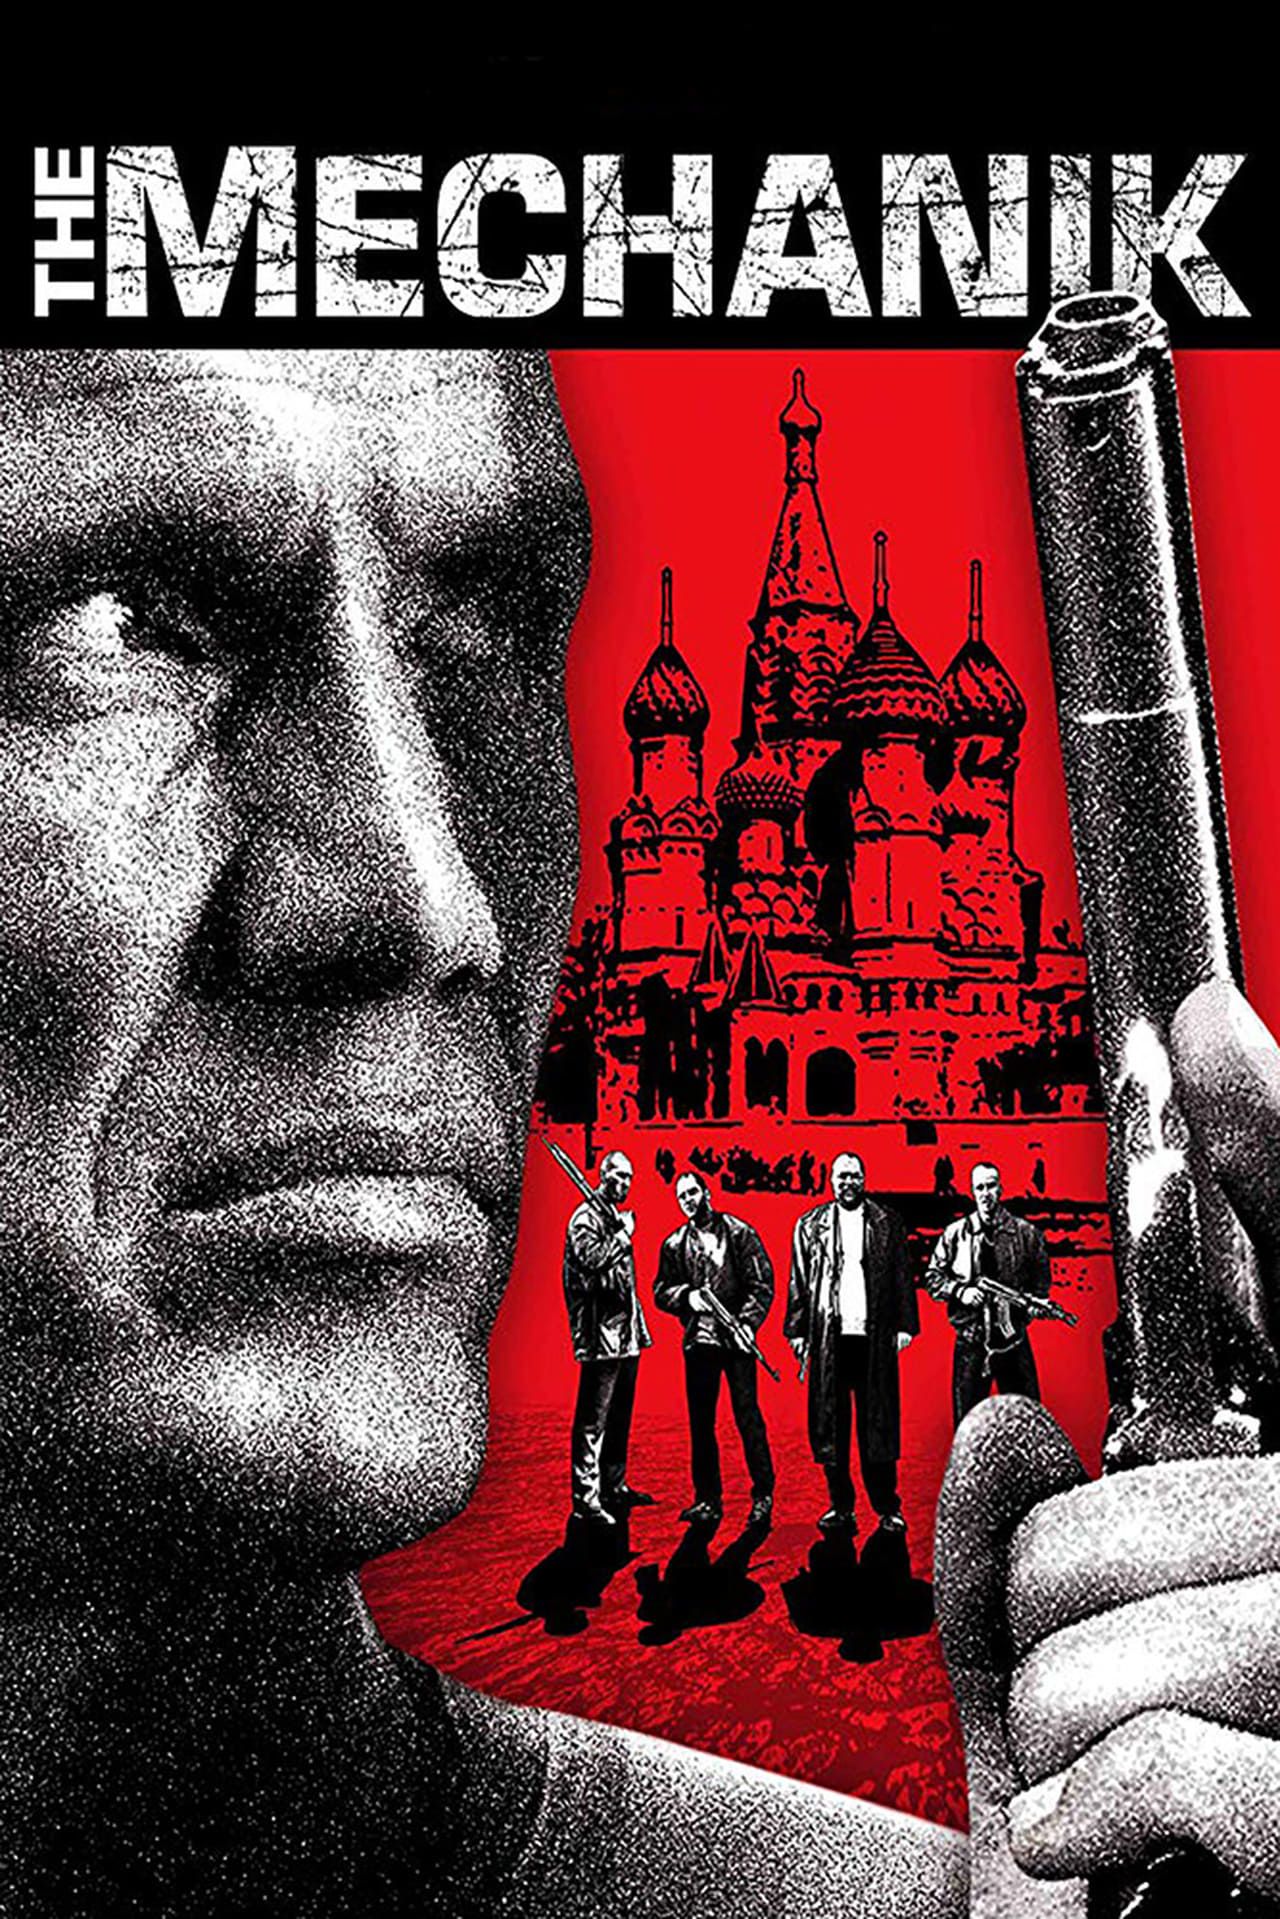 The Russian Specialist (2005) Hindi Dubbed Movie download full movie